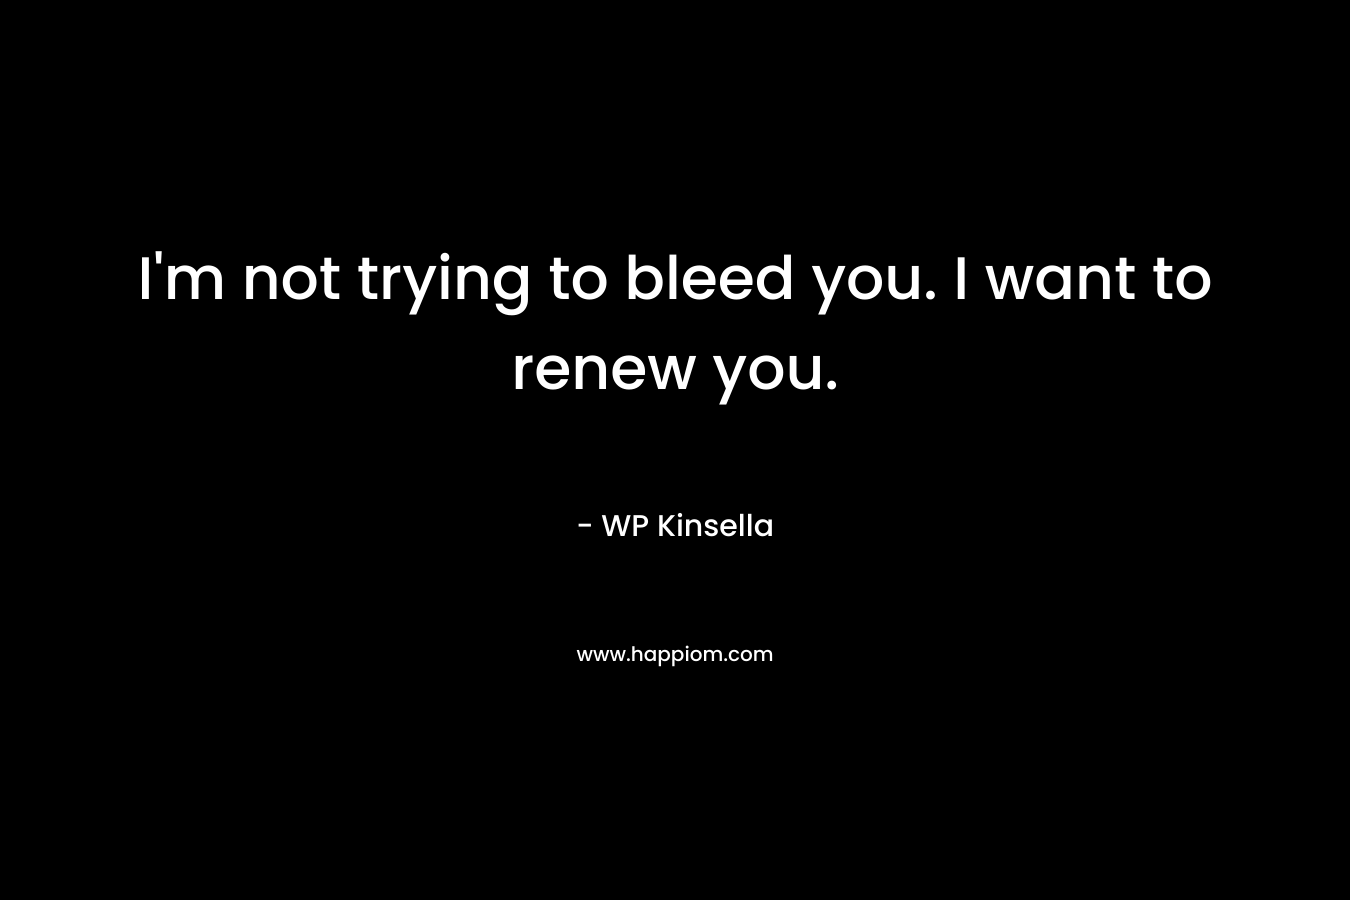 I’m not trying to bleed you. I want to renew you. – WP Kinsella